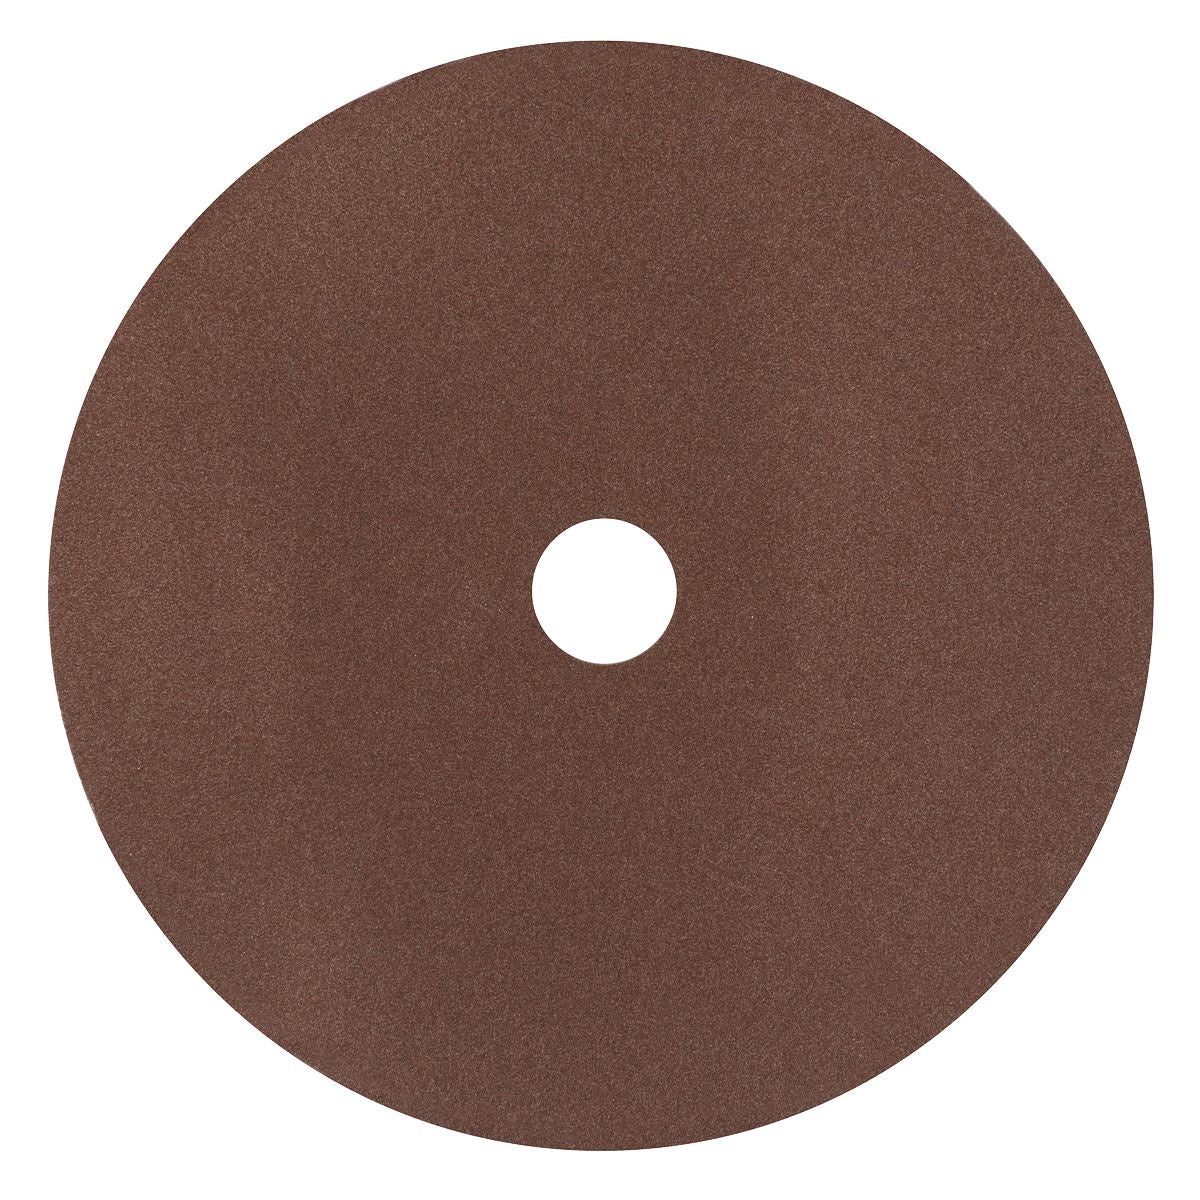 Worksafe by Sealey Fibre Backed Disc Ø175mm - 120Grit Pack of 25